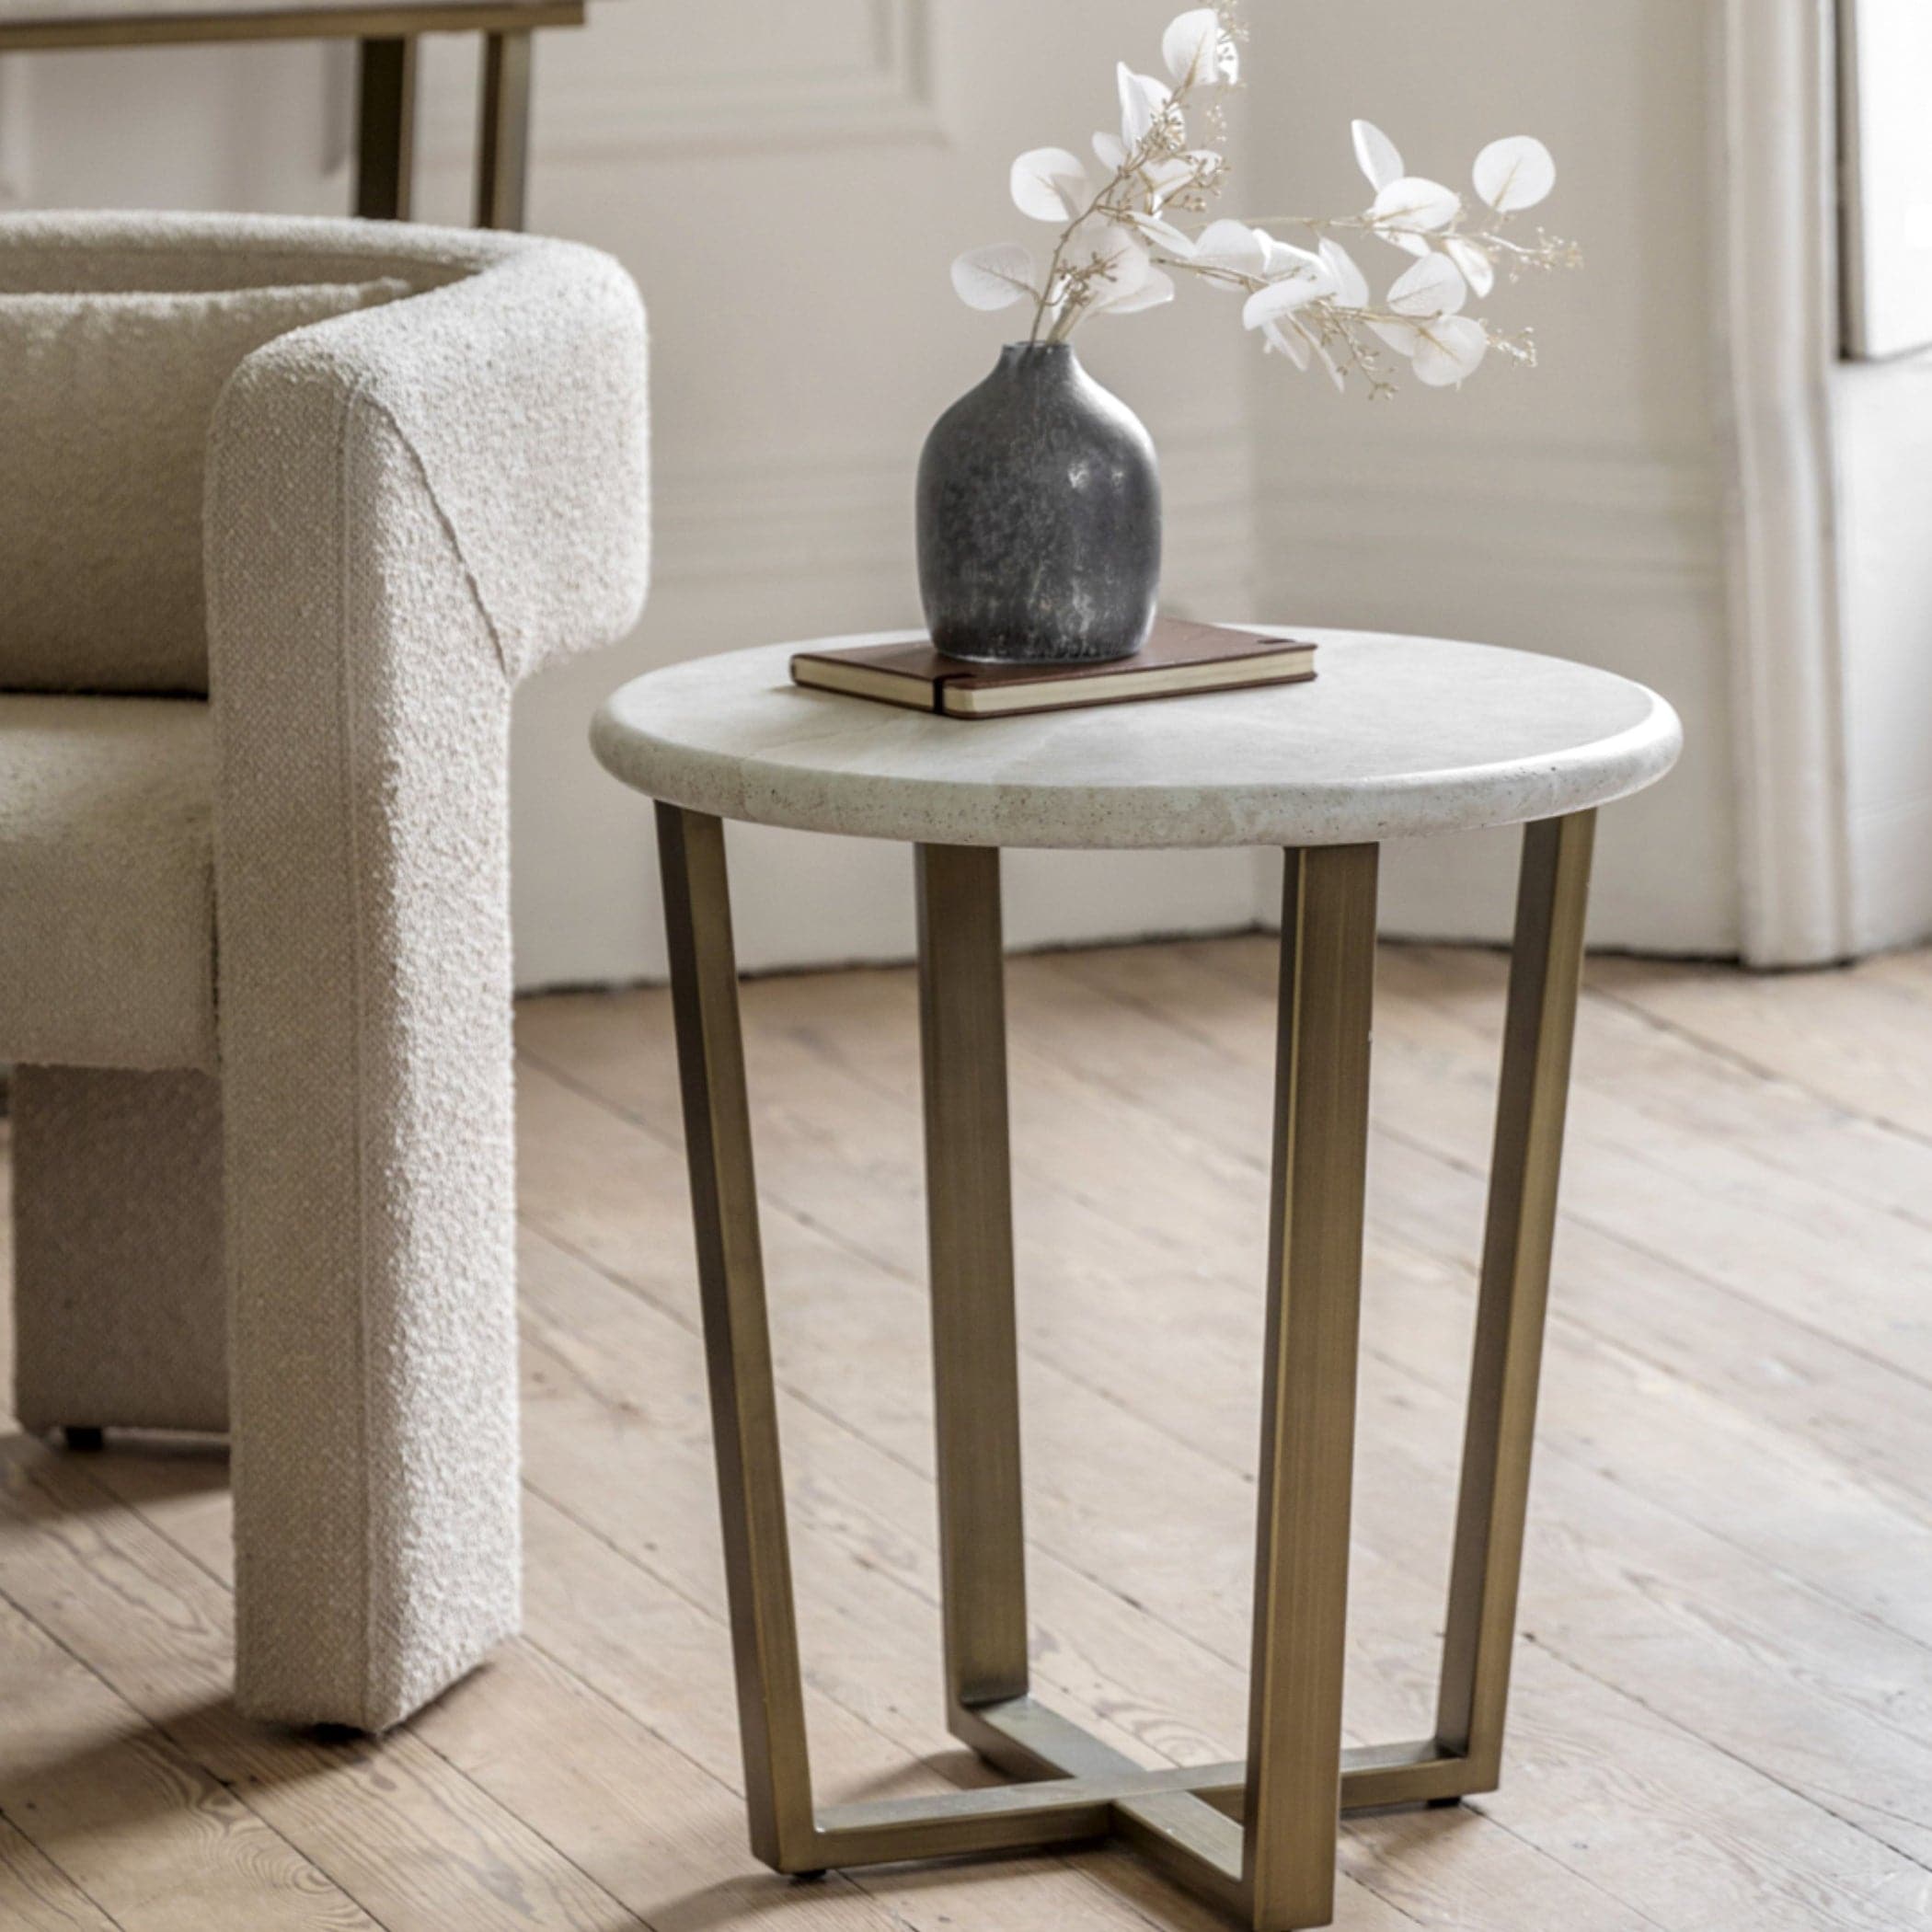 Faux Travertine Topped Antique Bronze Legged Side Table - The Farthing